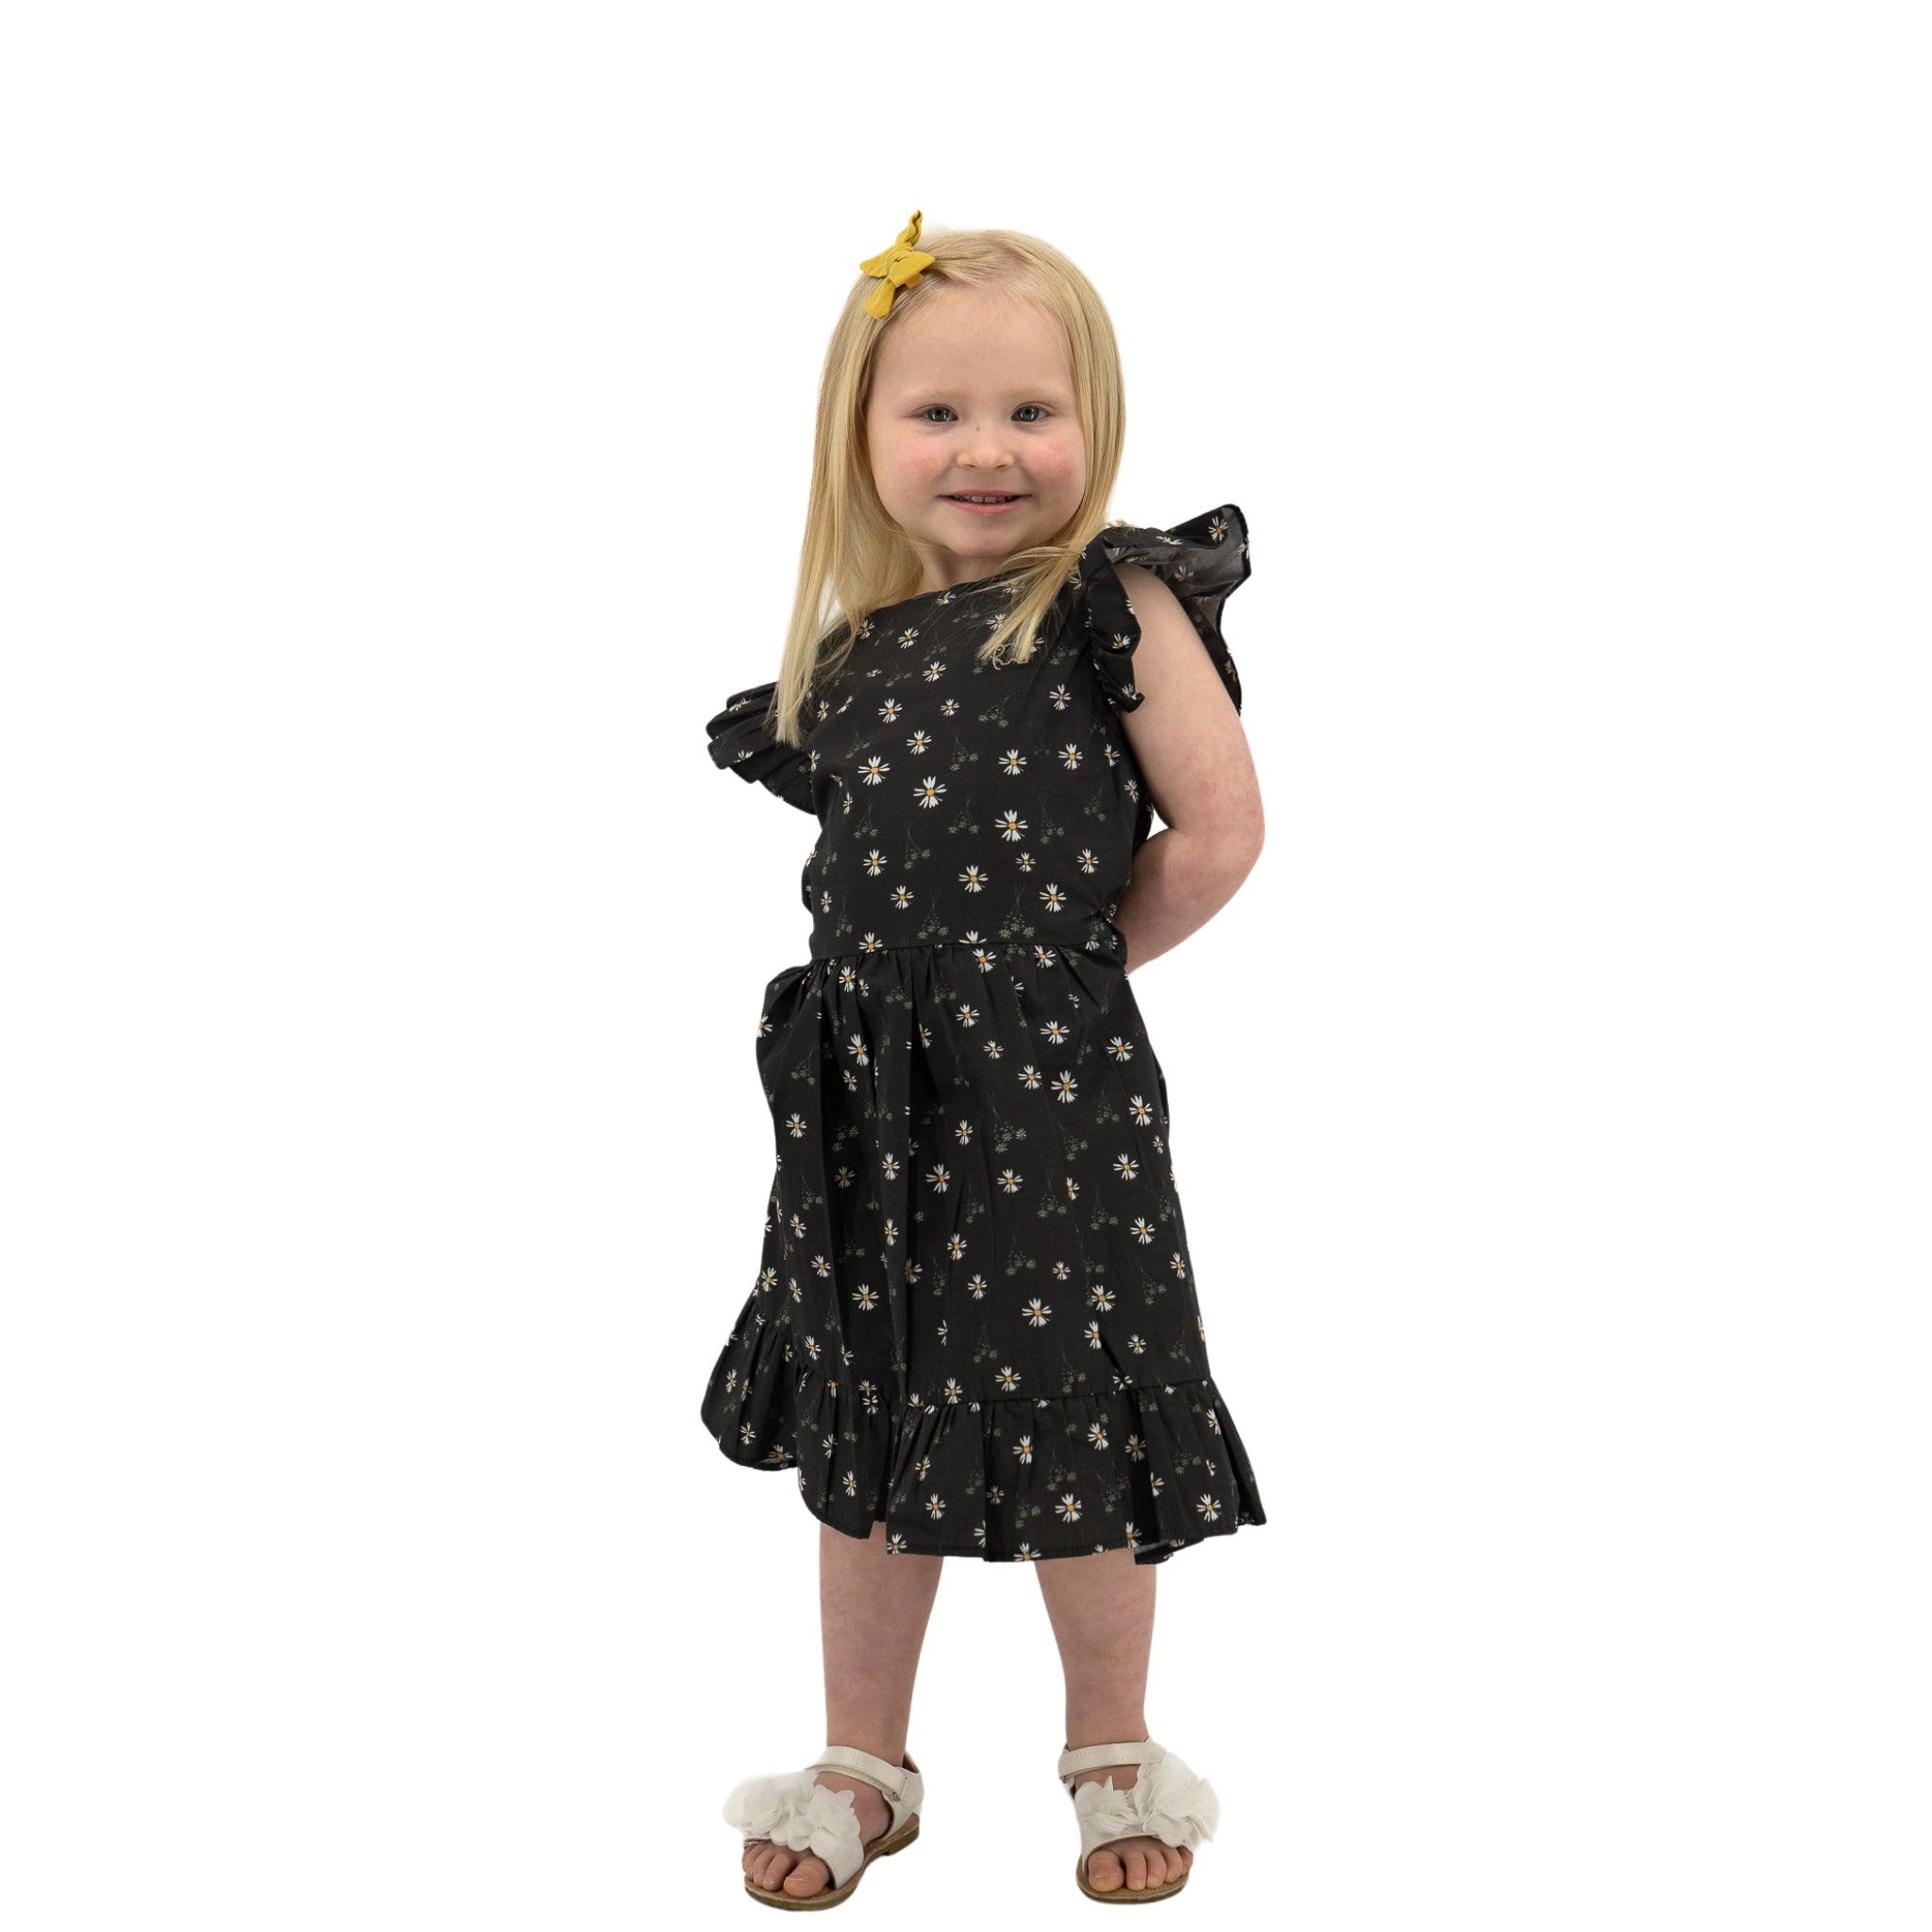 Young girl in a Karee Petite Blossom Black Cotton Dress and yellow hair bow standing against a white background, smiling.